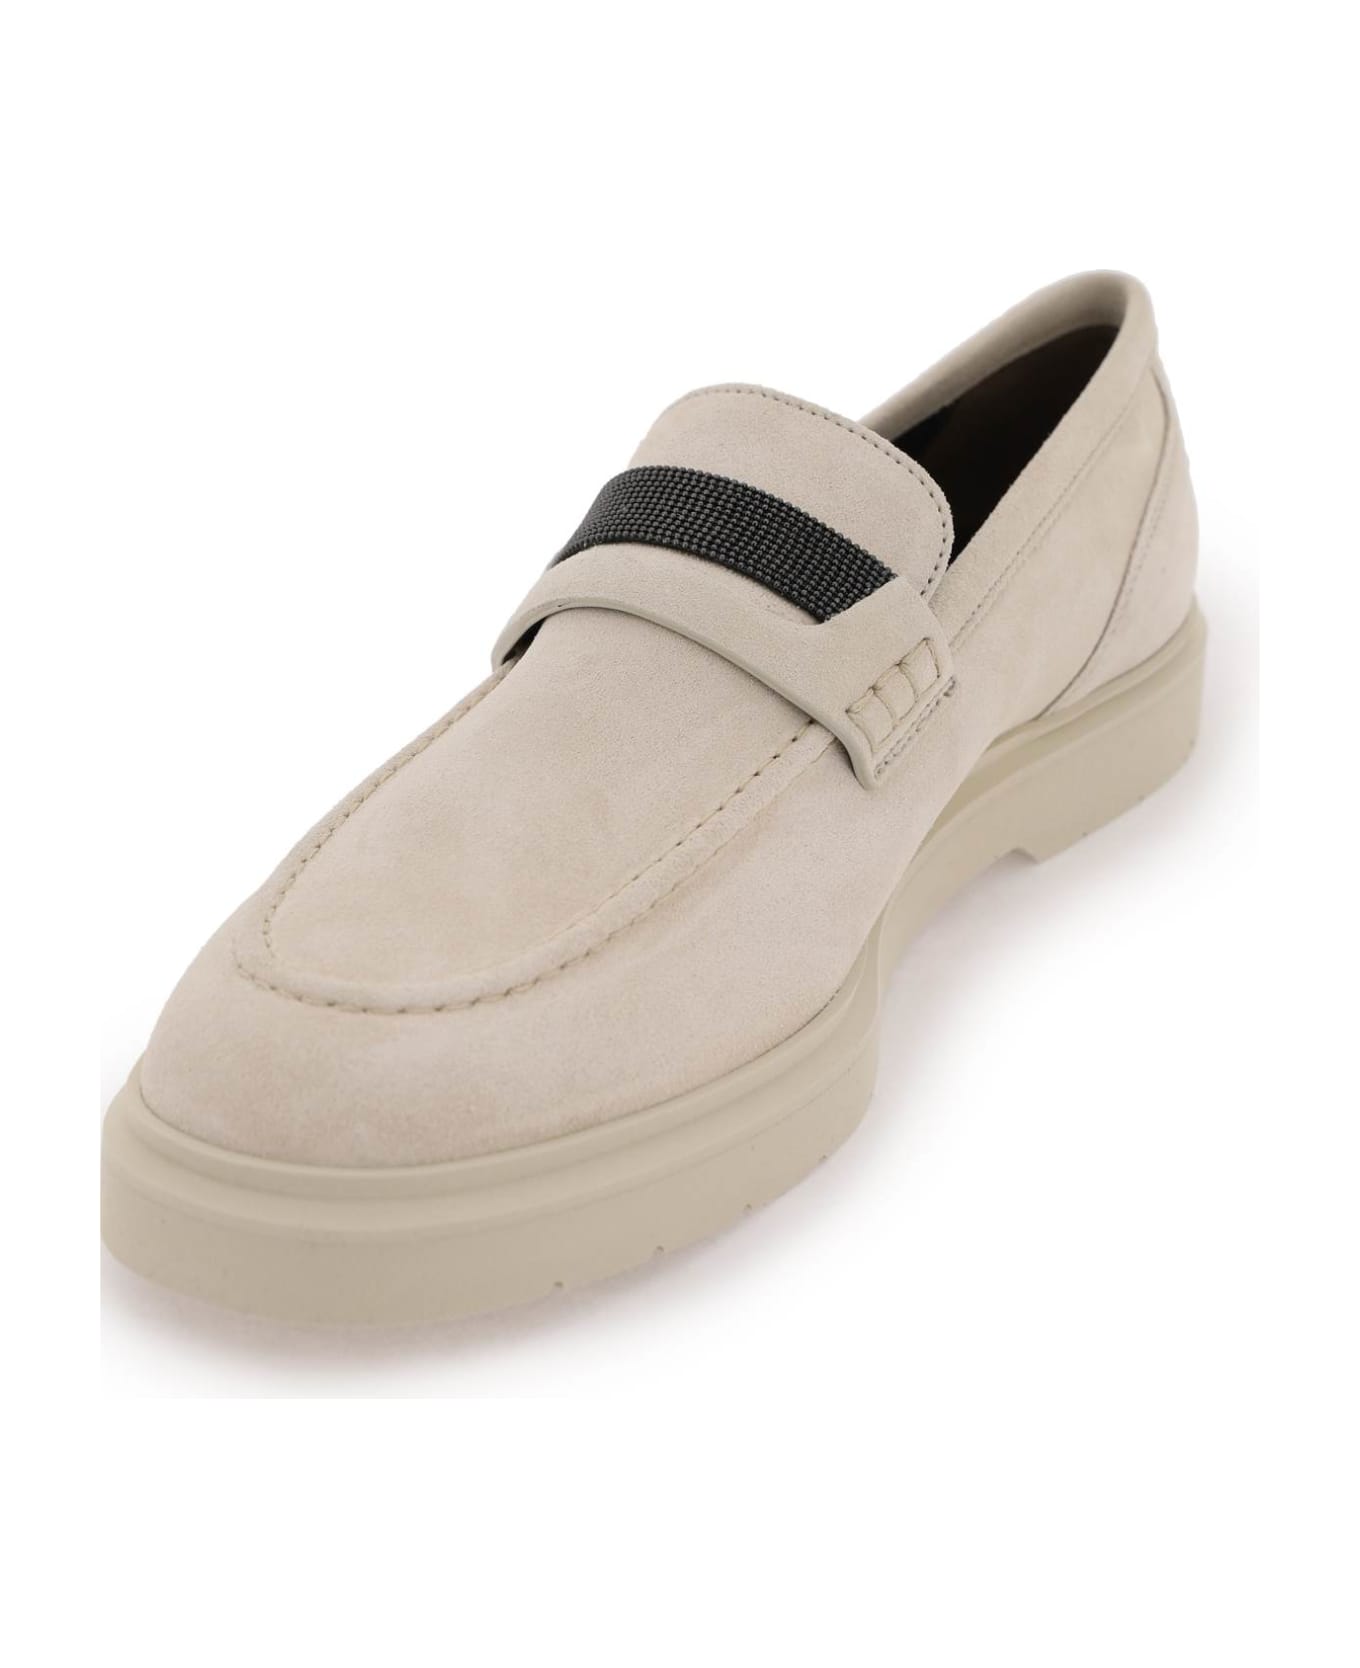 Brunello Cucinelli Suede Penny Loafer With Jewellery - Beige フラットシューズ